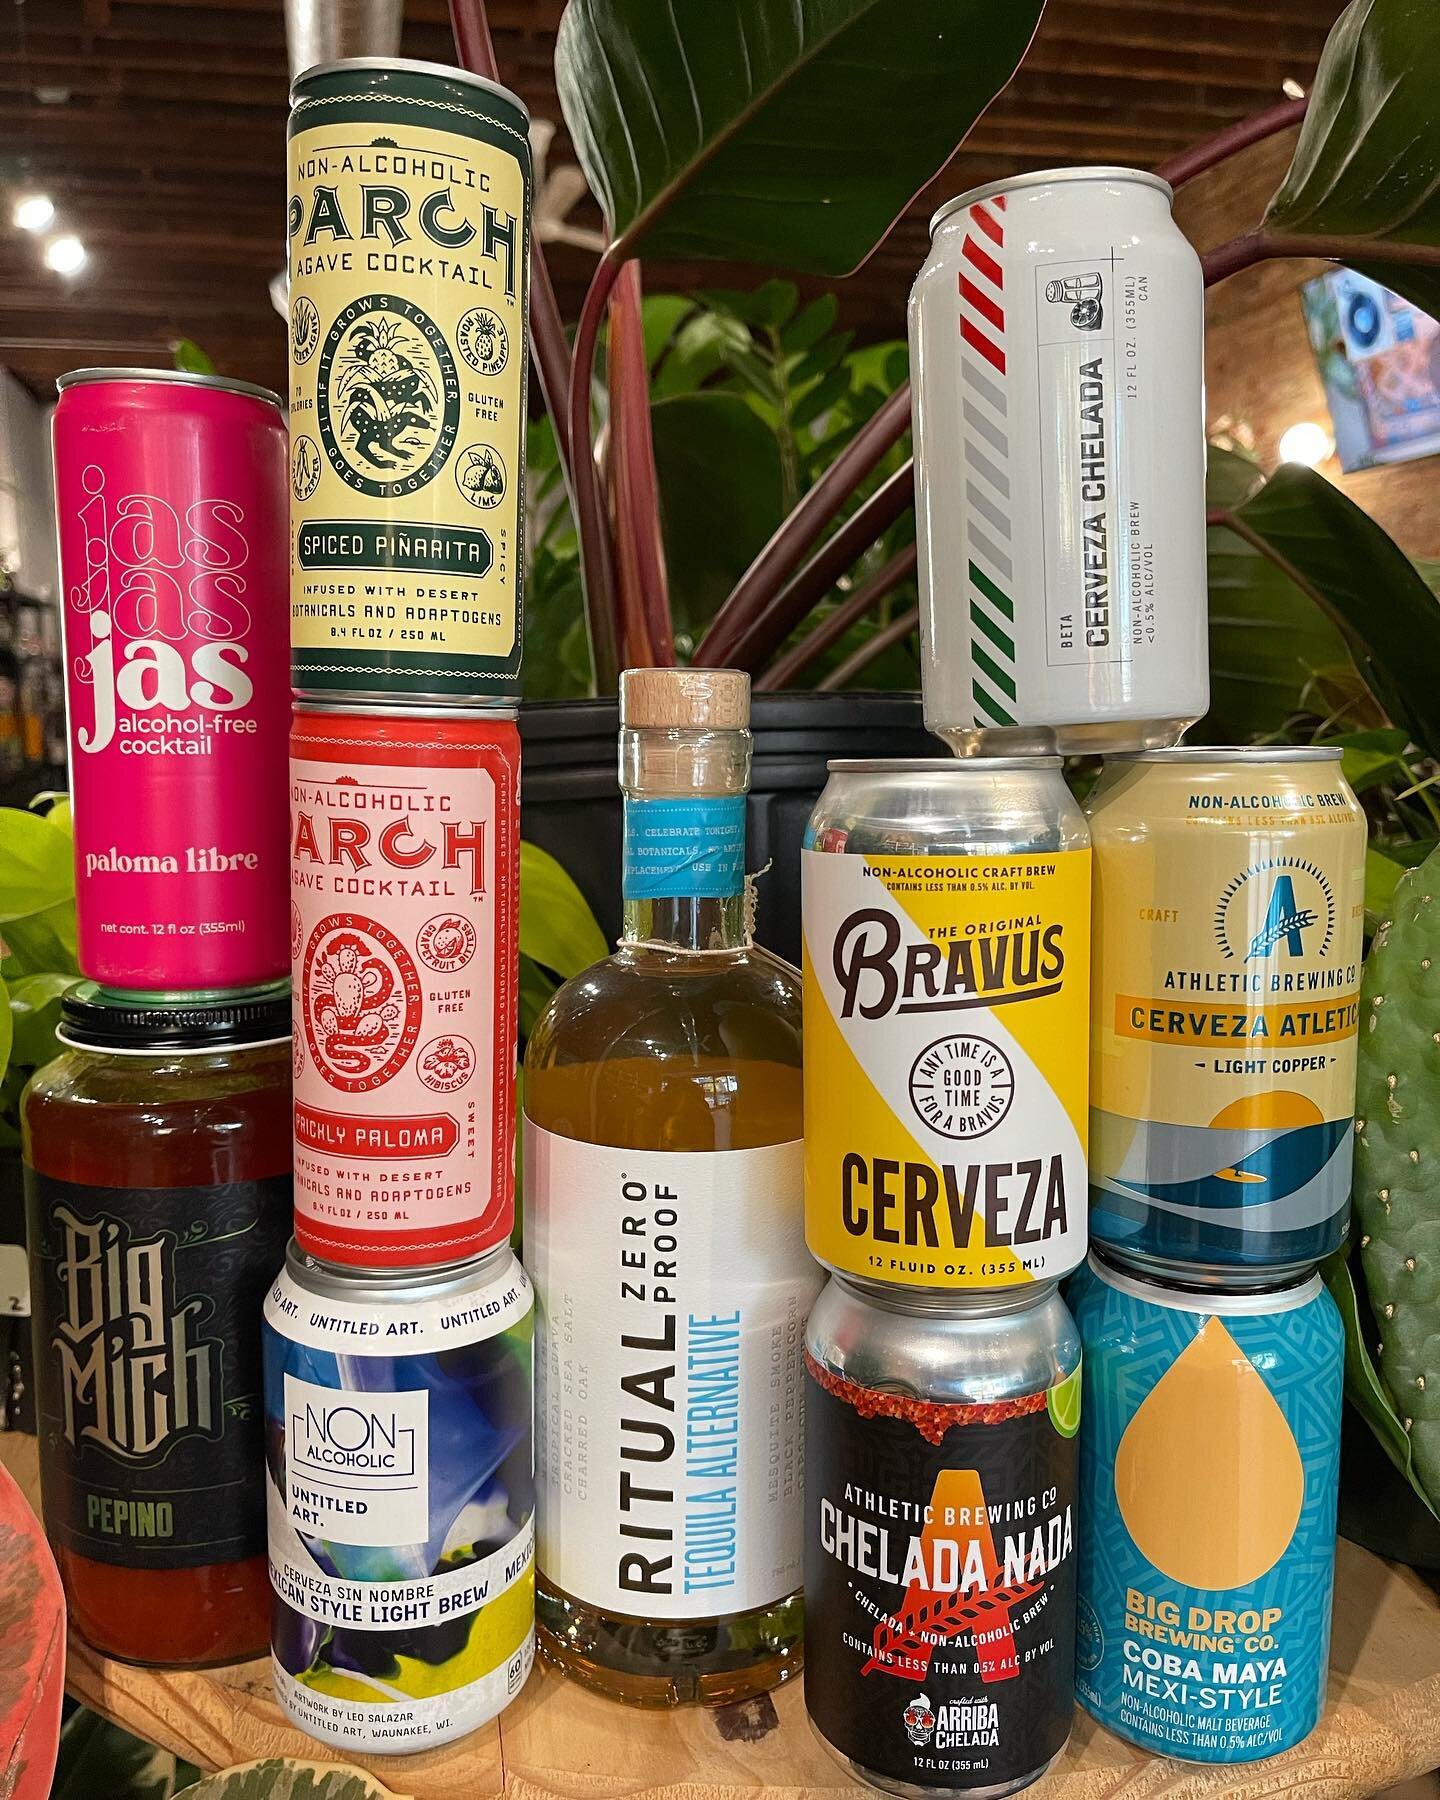 if you&rsquo;re looking for a tasty way to celebrate Cinco de Mayo tomorrow (or ~drinko de mayo~ 🥴) without the next day hangover - we got you covered! Pick up something fun or new or both ☀️
&bull;
&bull;
&bull;
#BendicionBottleShop #NABeer #SoberC